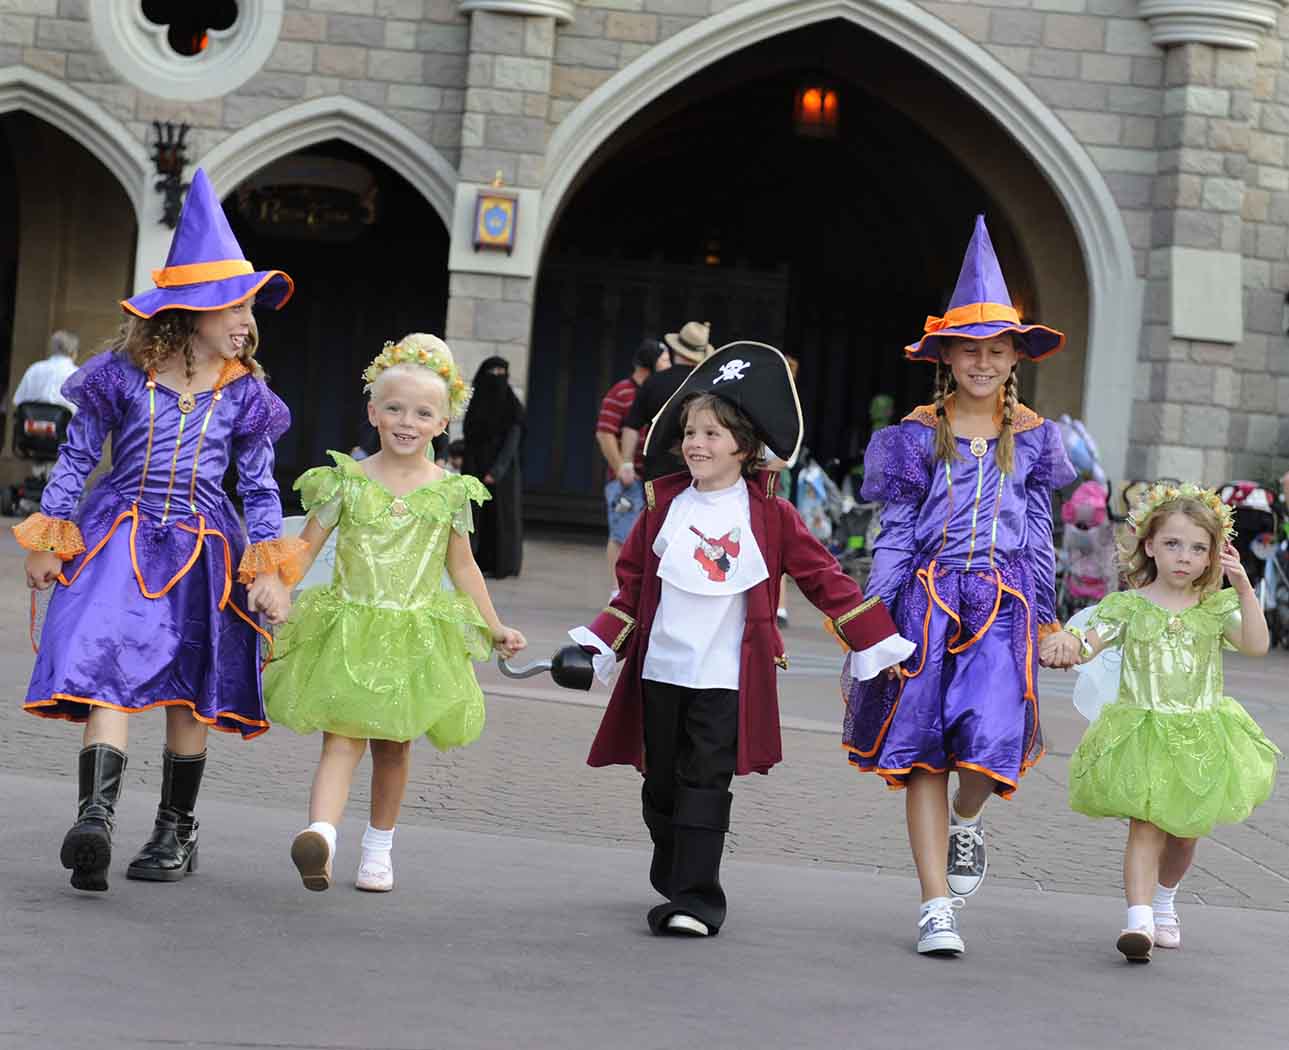 Kids in costumes at Halloween